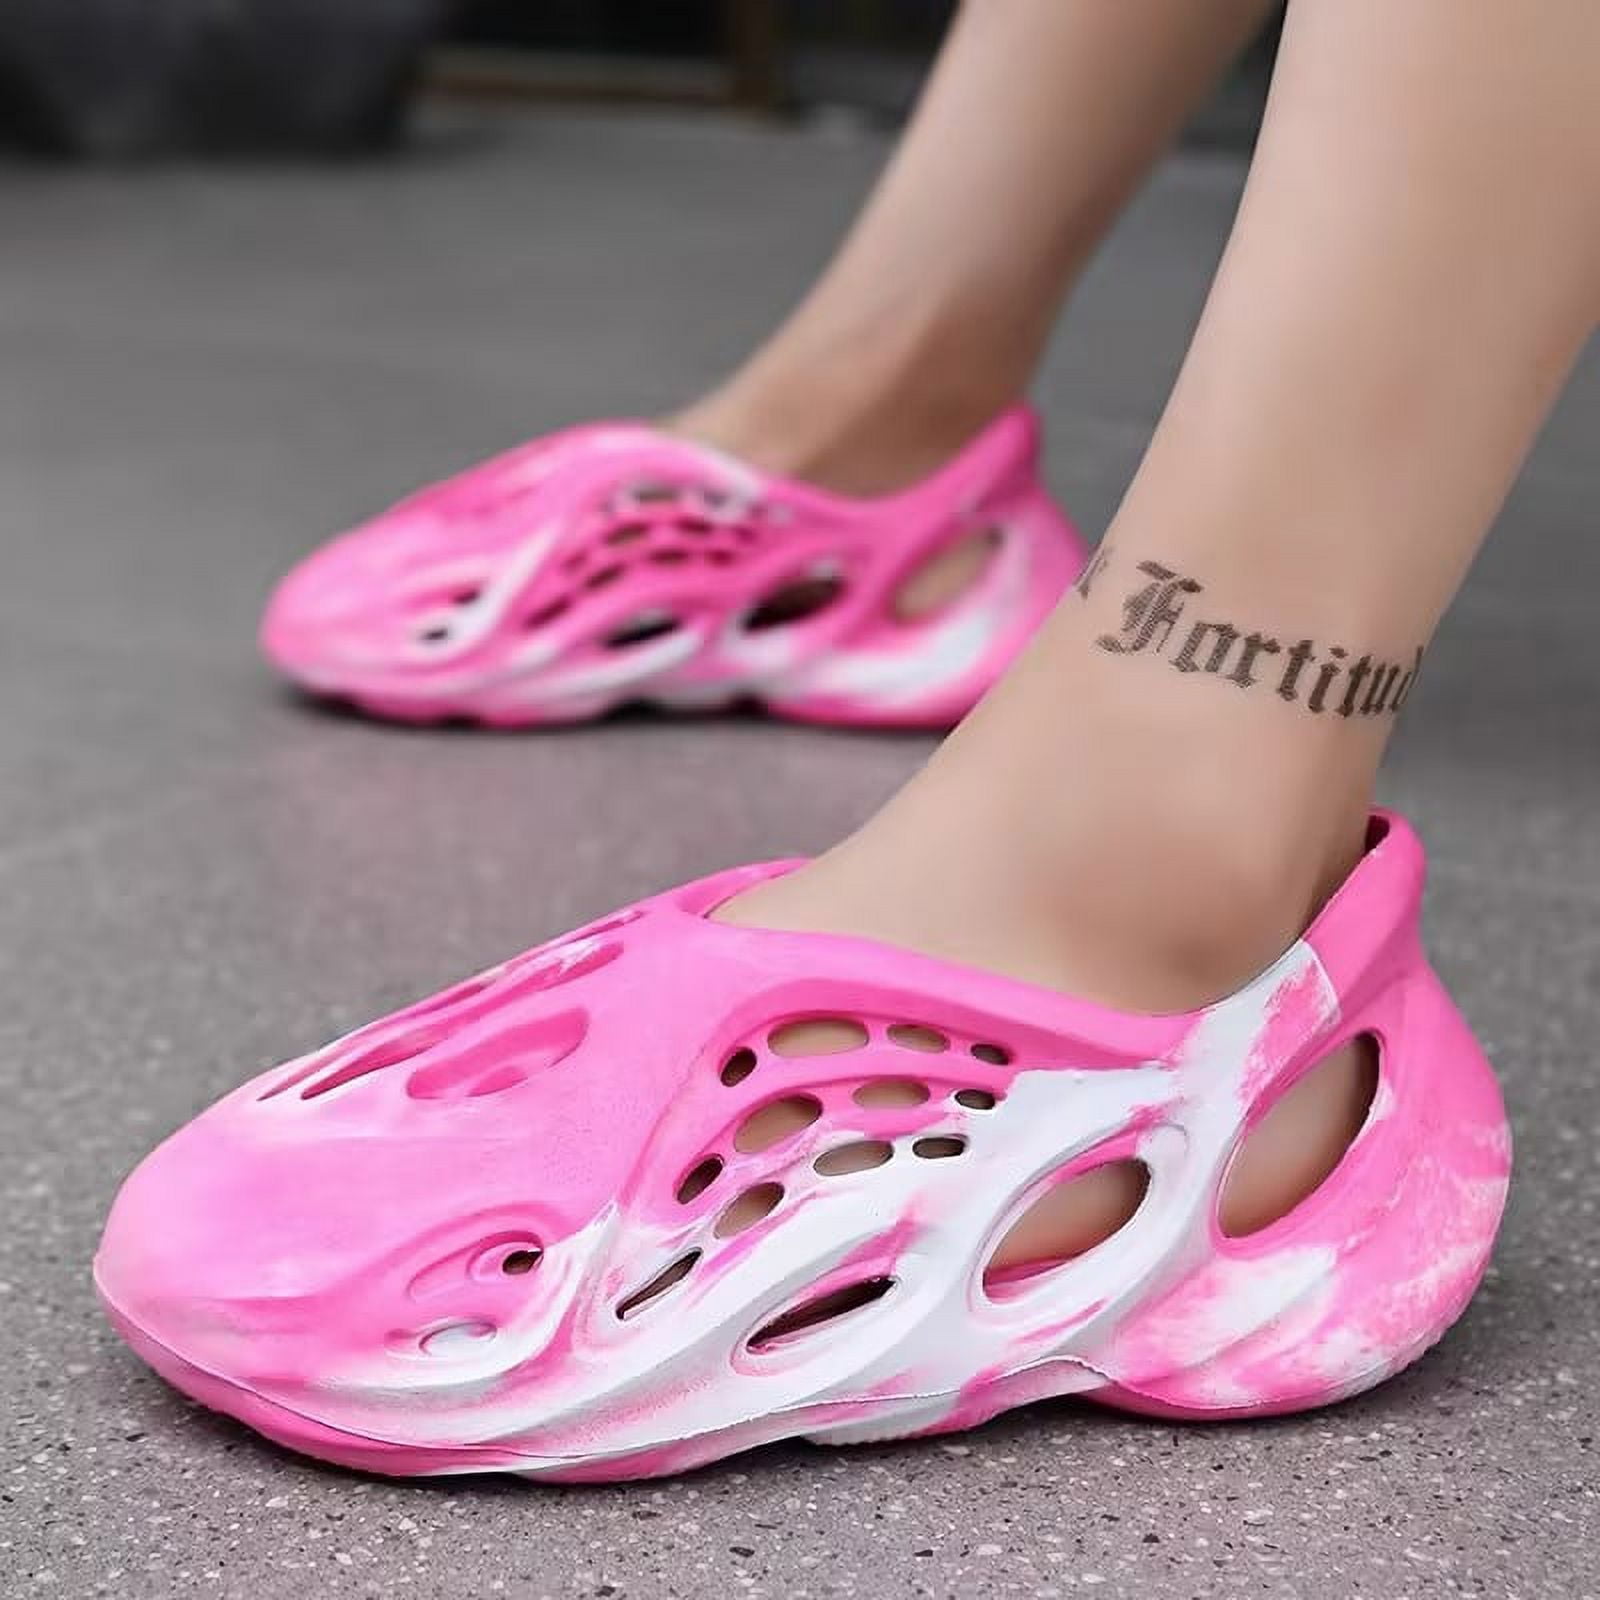 Men Women Clogs Foam Runner Shoes Casual  Sports Shoes Lightweight Walking Sneakers Non-Slip Water Shoes Slip-On Outdoor Indoor Summer Beach Sandals Breathable Cloud Slides Slippers - image 1 of 7